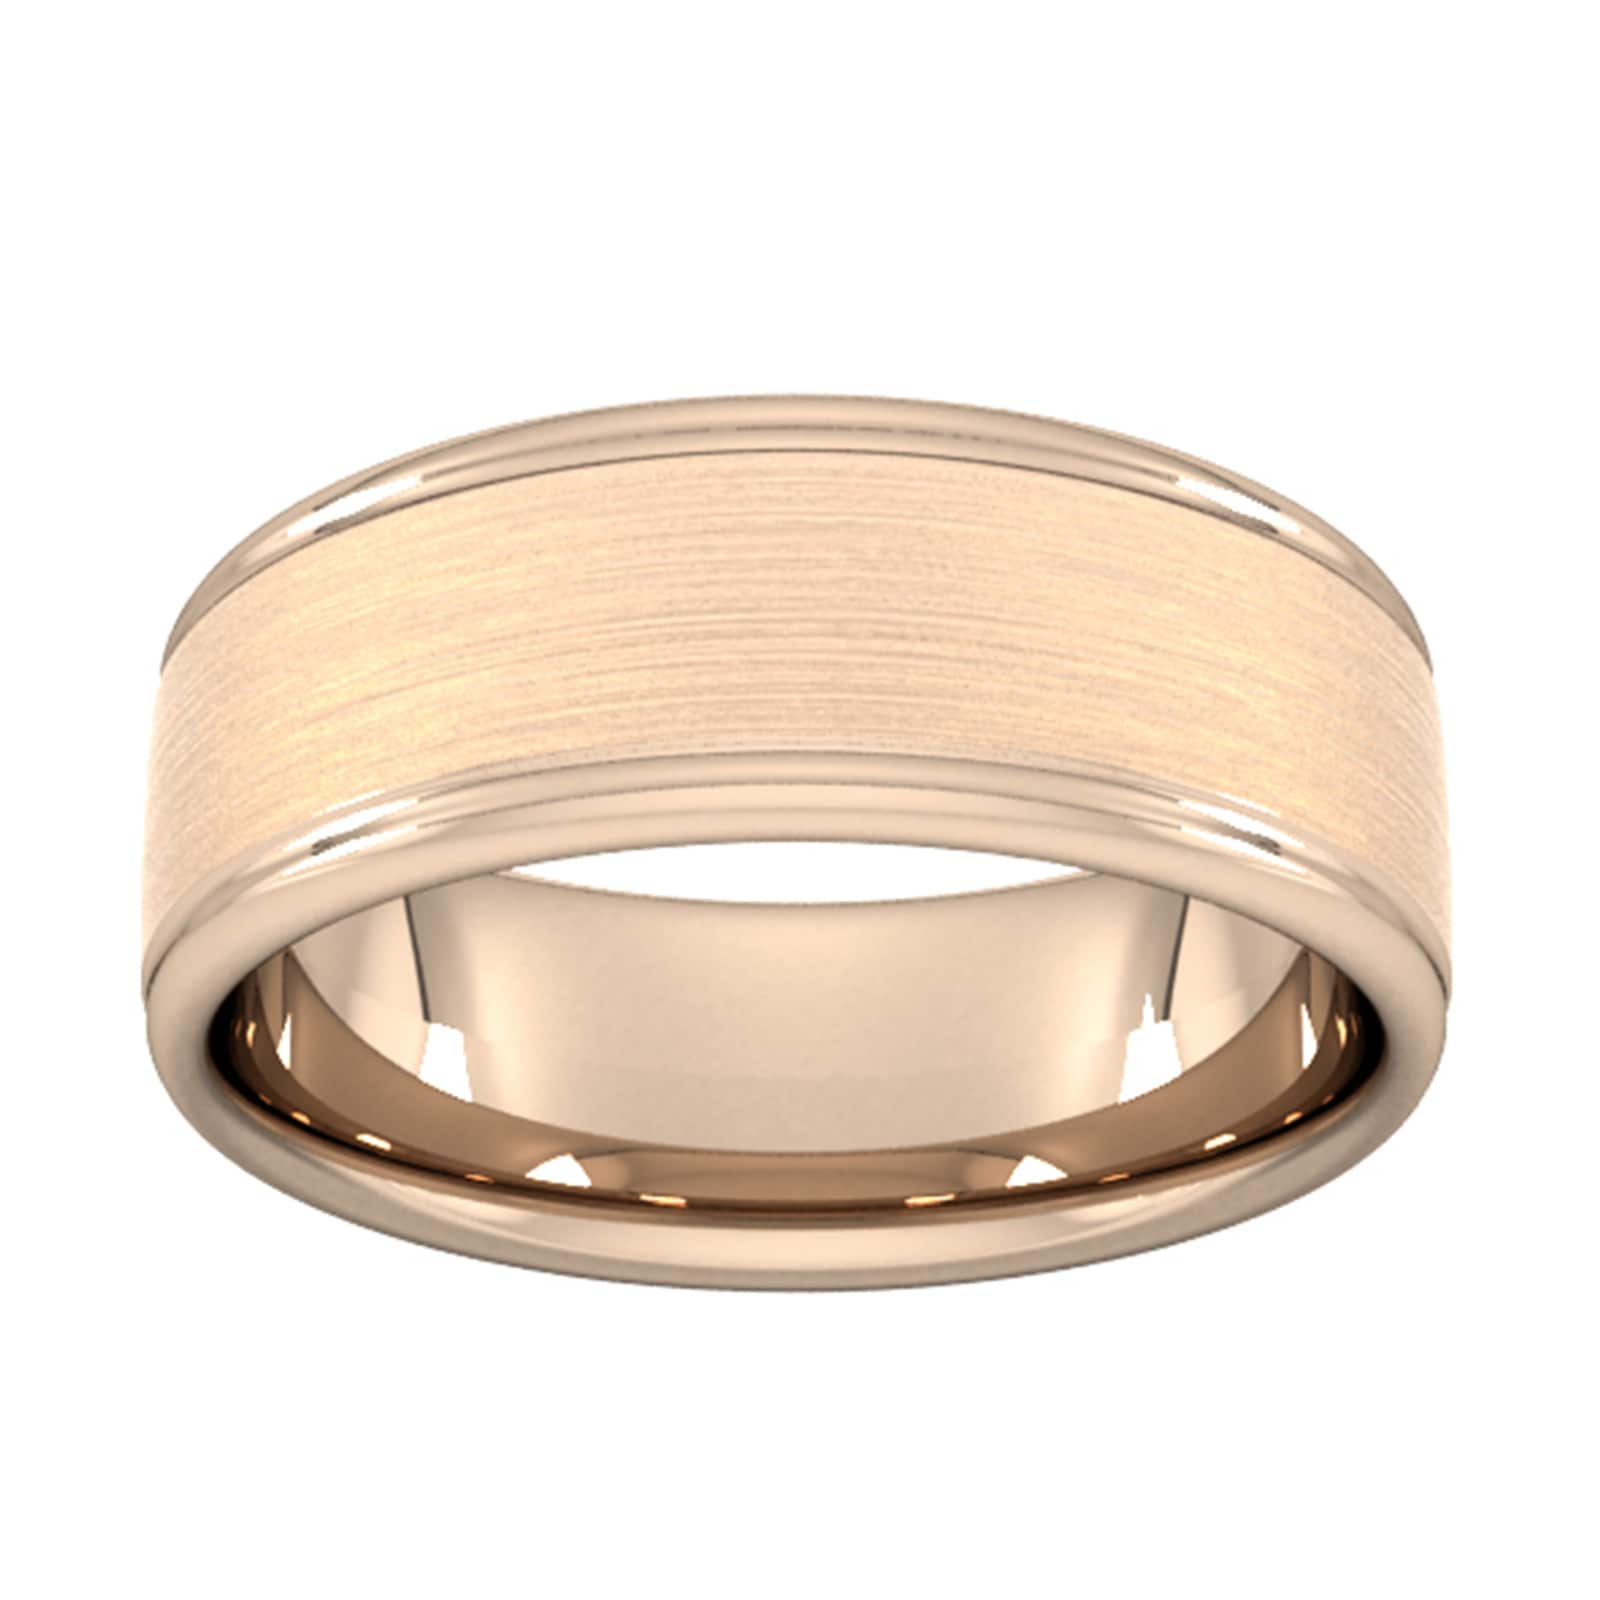 8mm Slight Court Extra Heavy Matt Centre With Grooves Wedding Ring In 9 Carat Rose Gold - Ring Size G